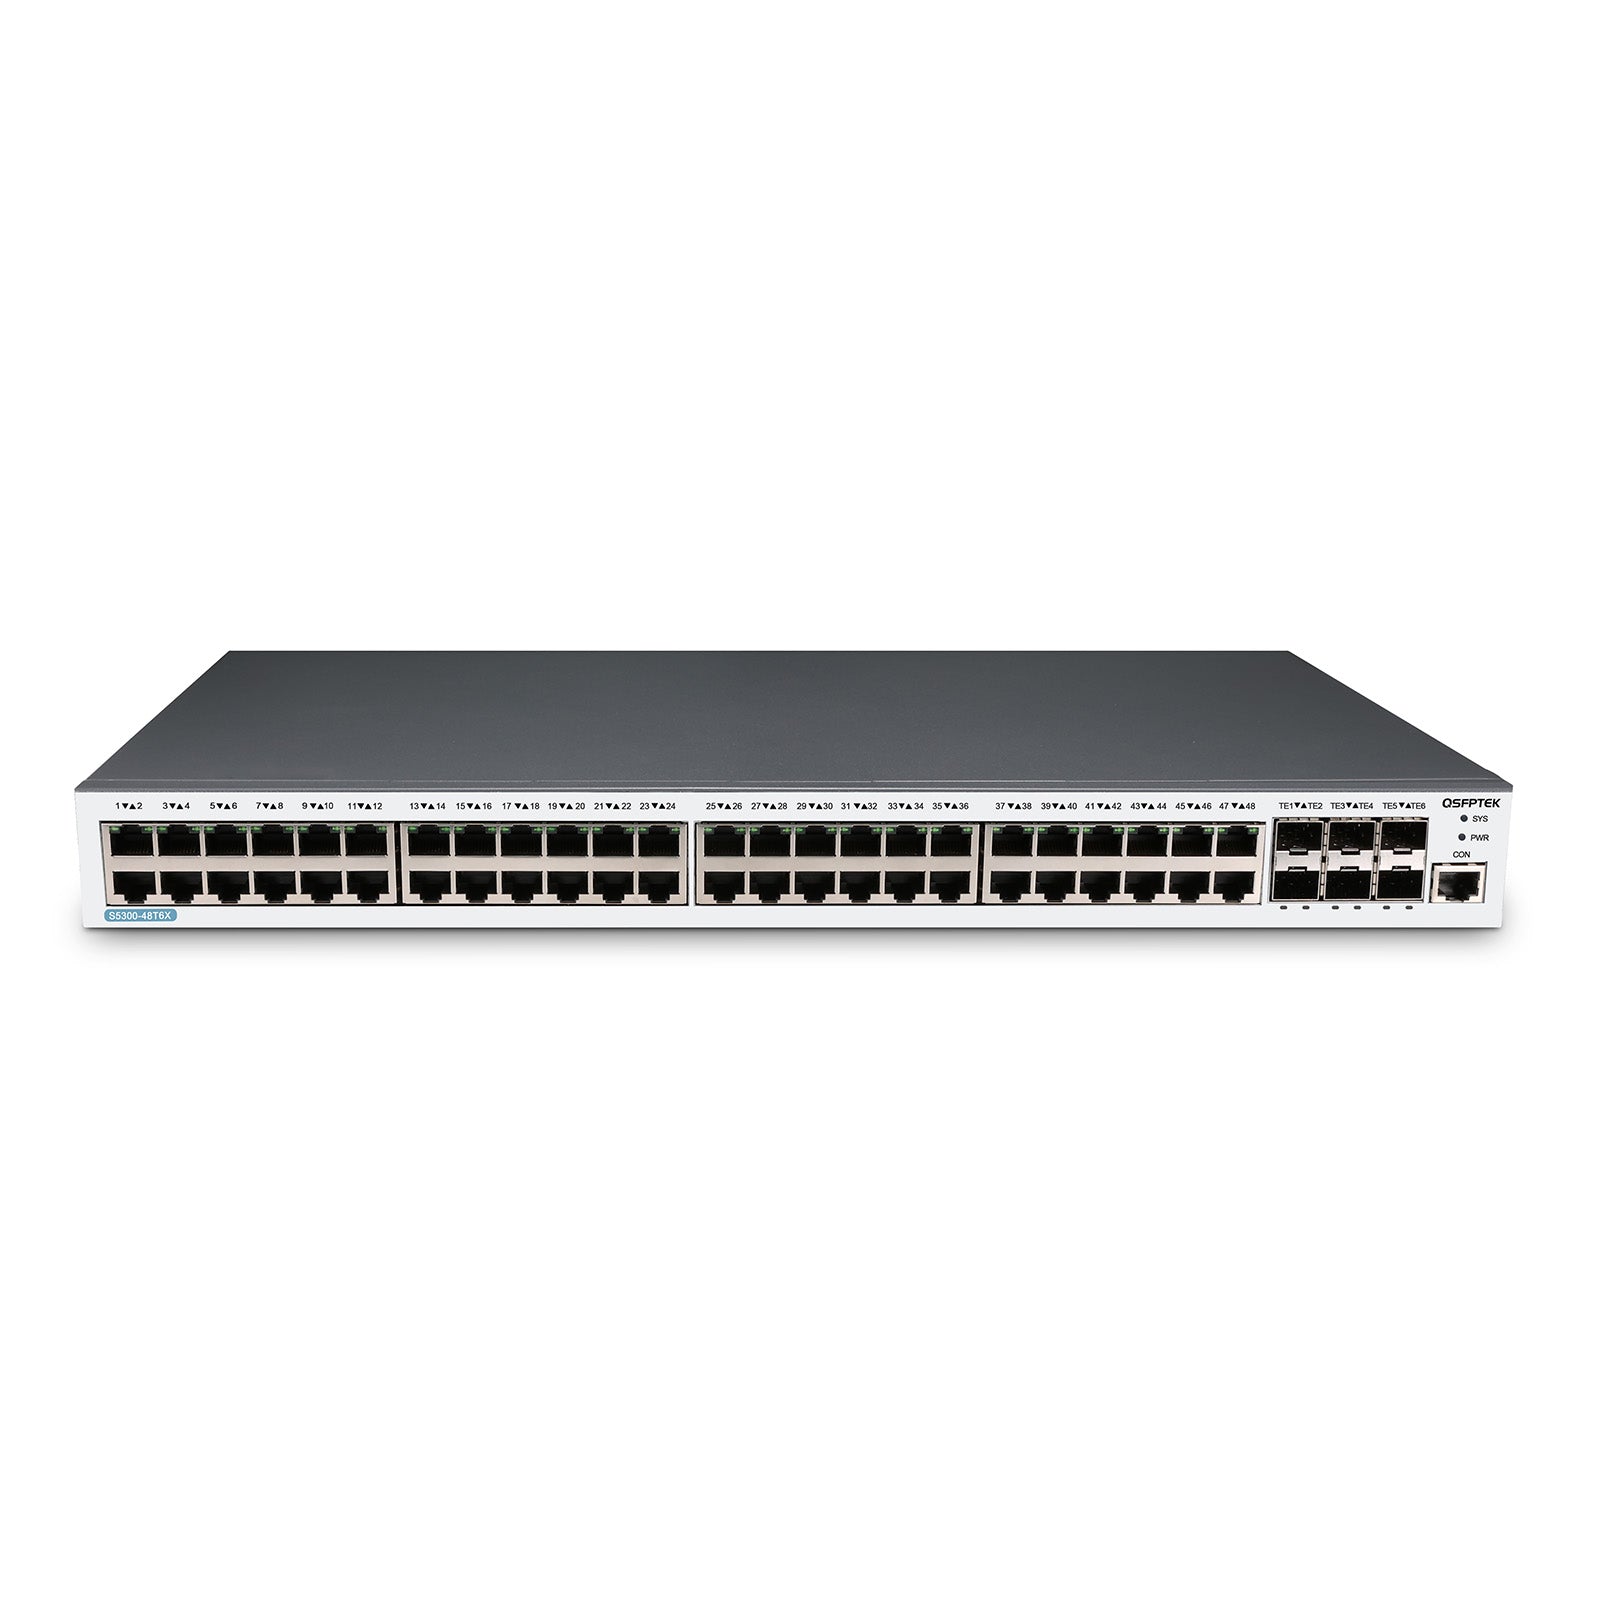 S5300-48T6X, 48 Port Ethernet L3 Switch, 48x GE RJ45 Ports with 6x 10GE SFP+ Uplink, Stackable Switch